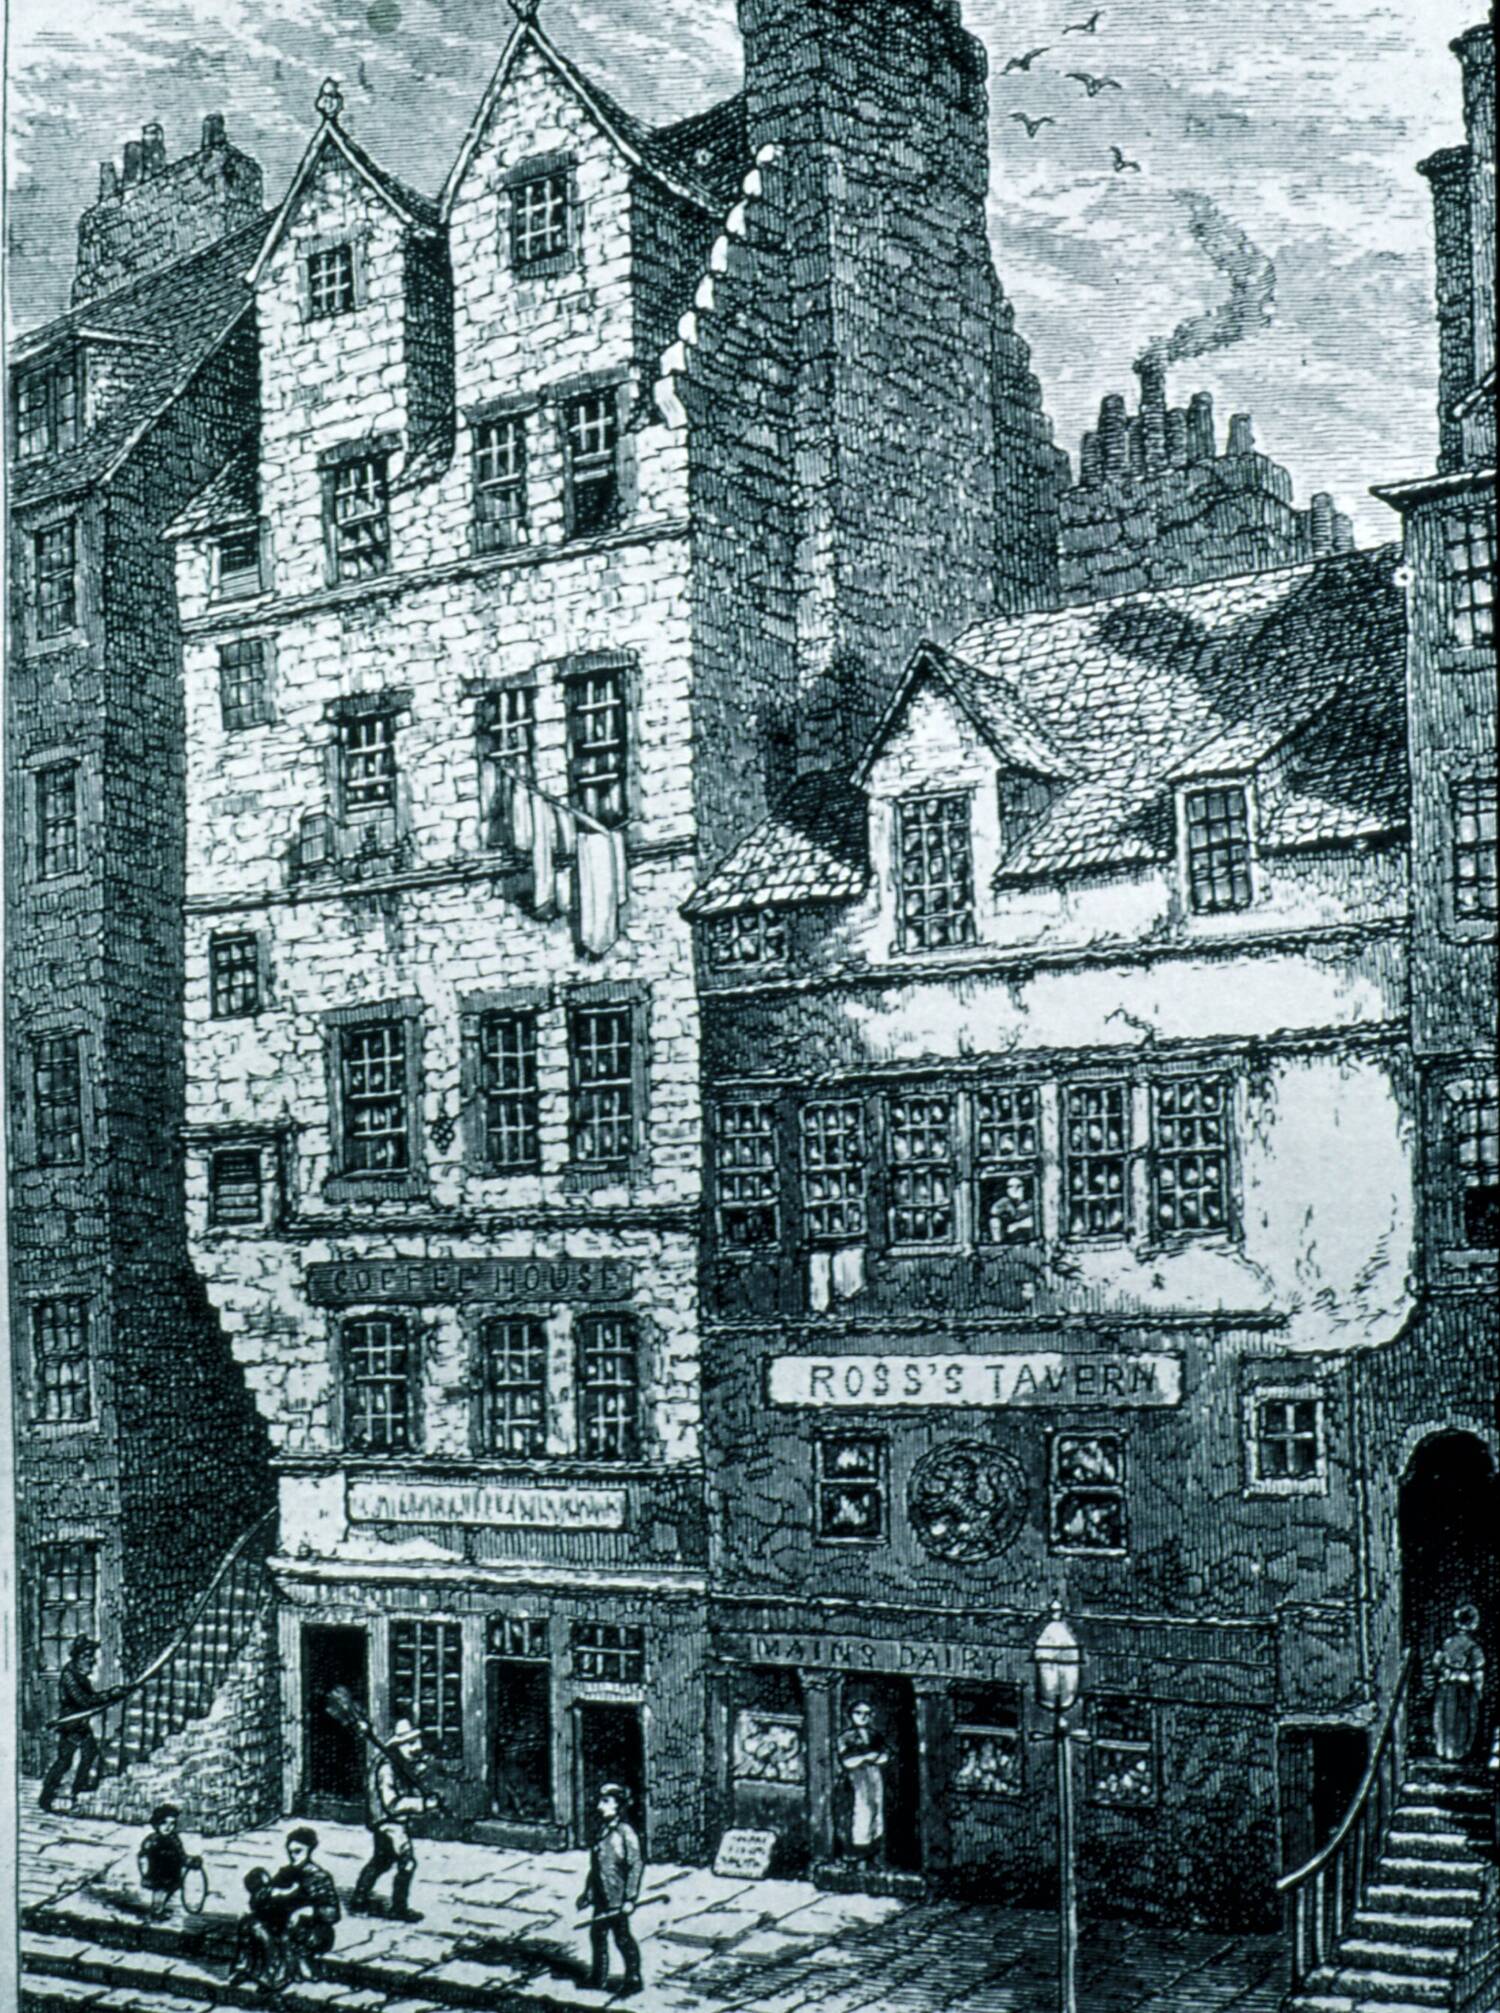 Black and white illustration showing a narrow 7 storey tenement building in the 19th century.